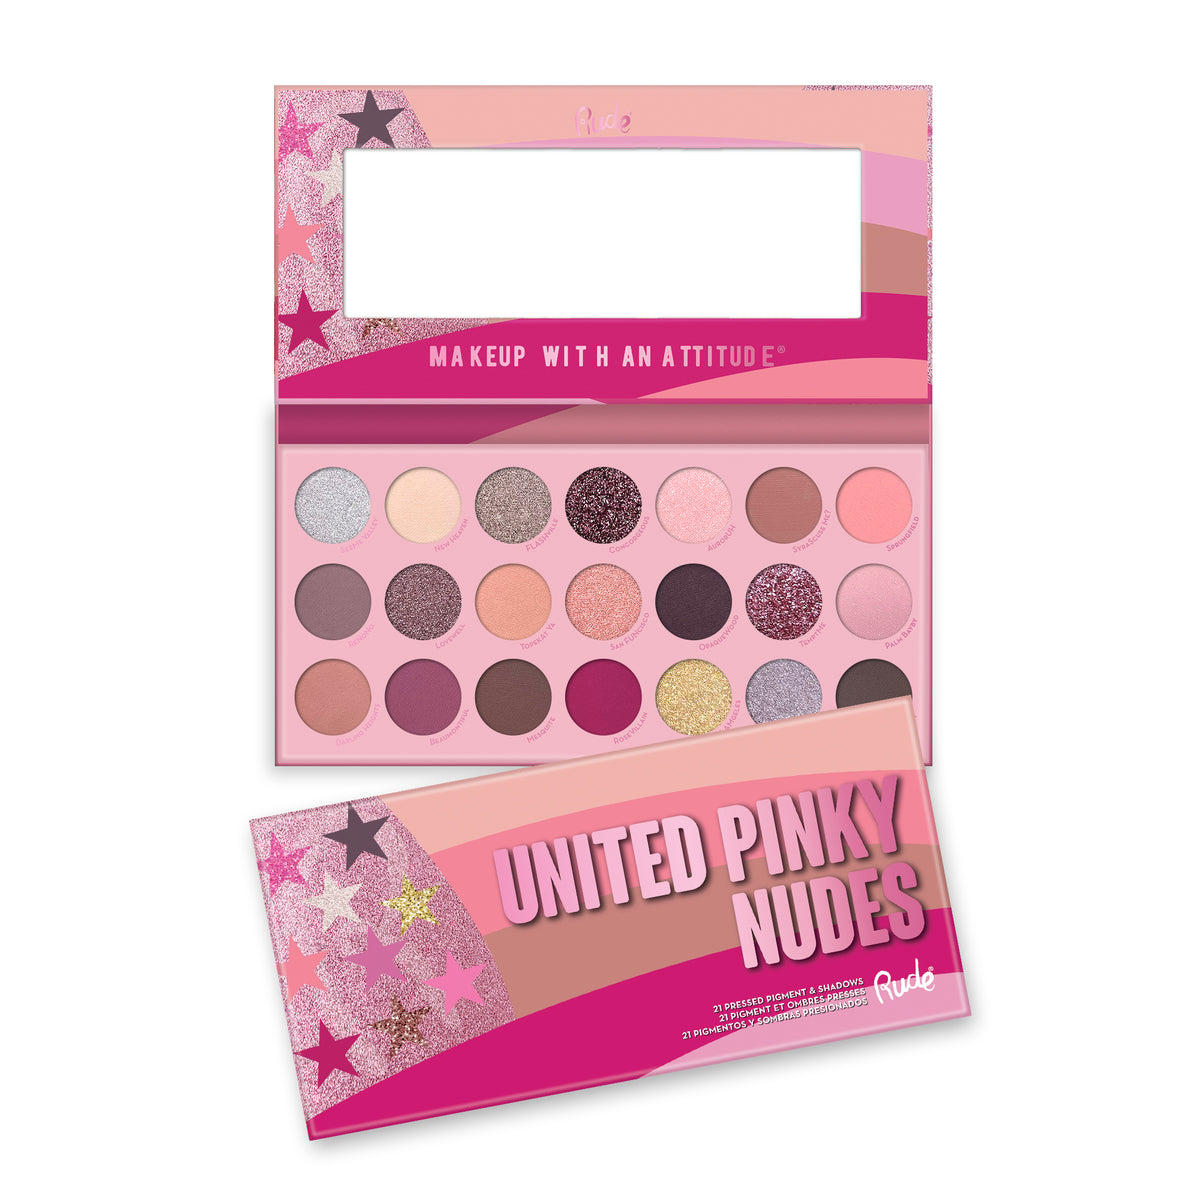 United Pinky Nudes - 21 Pressed Pigment & Shadows Palette